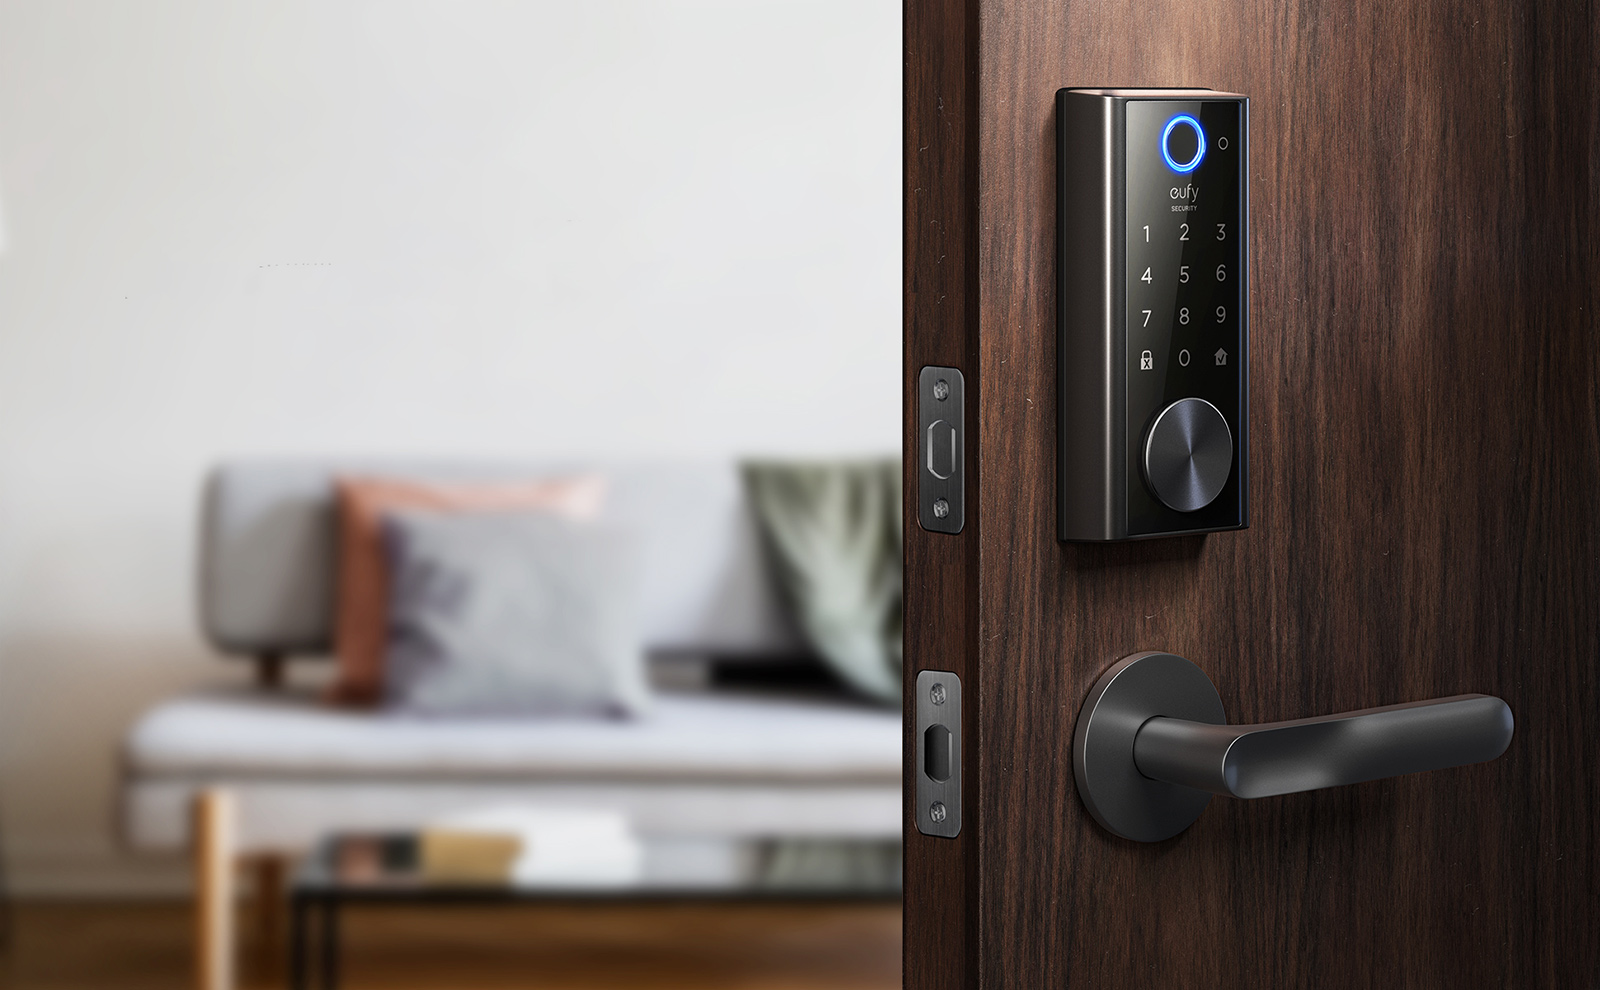 Unlock your door the same way you unlock your phone with eufy’s stunning Smart Lock Touch